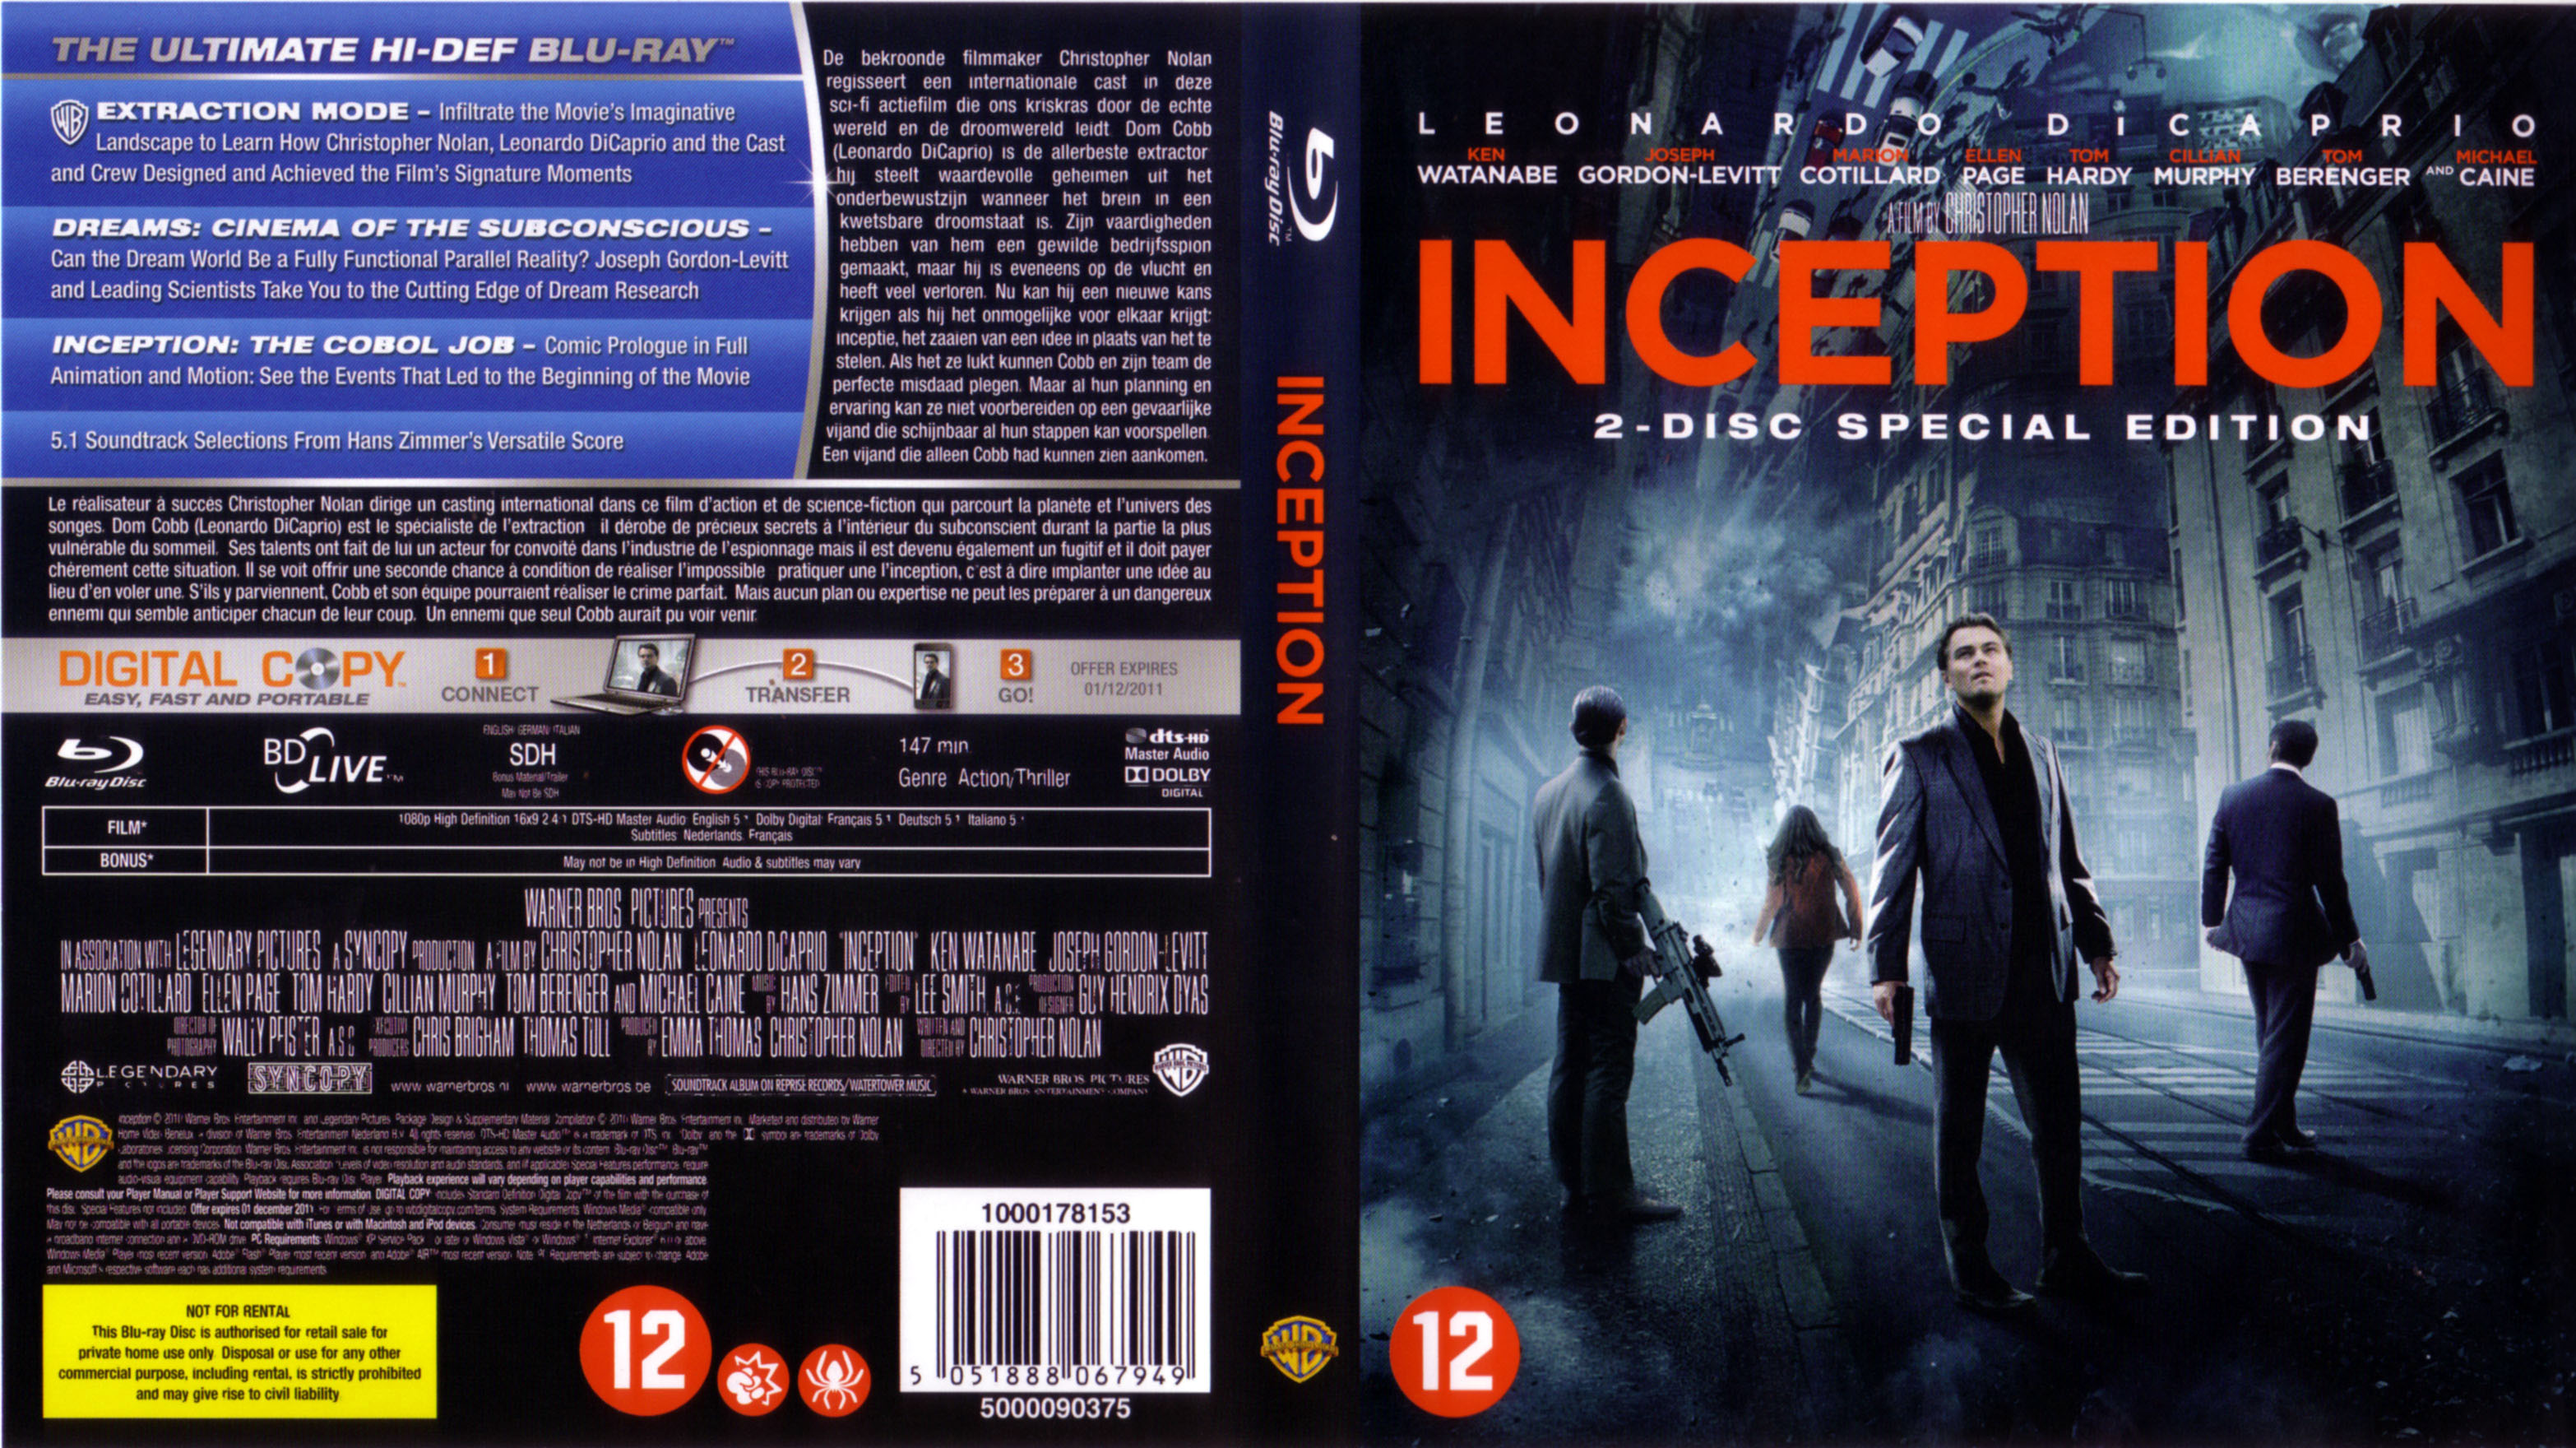 Jaquette DVD Inception (BLU-RAY) v2